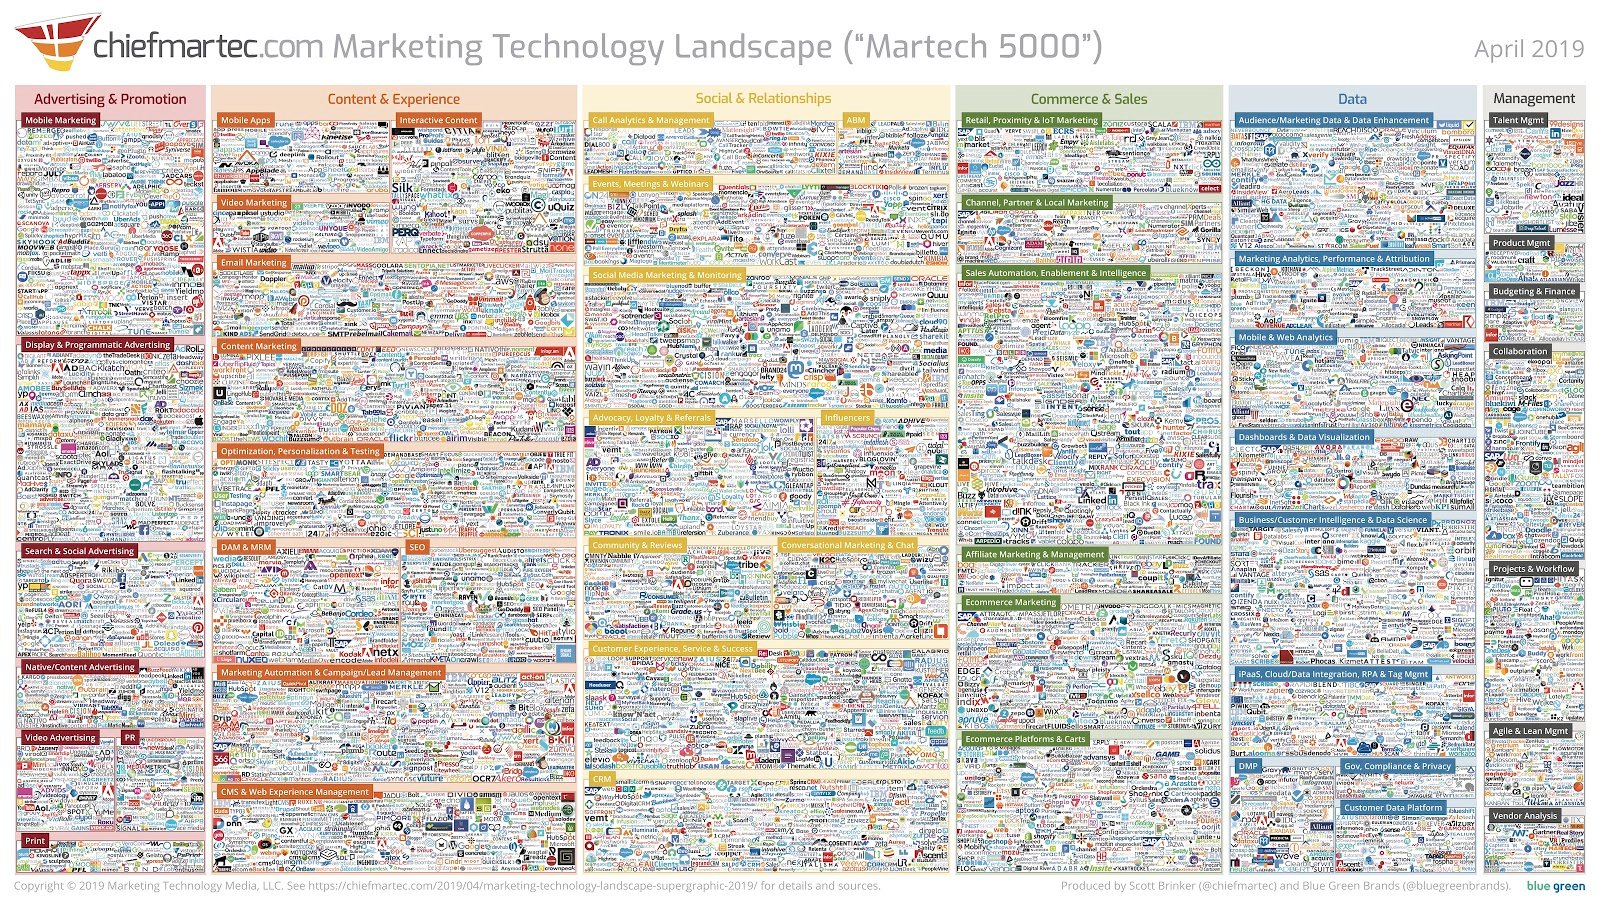 a_picture_of_all_of_the_marketing_software_companies_the_martech_5000